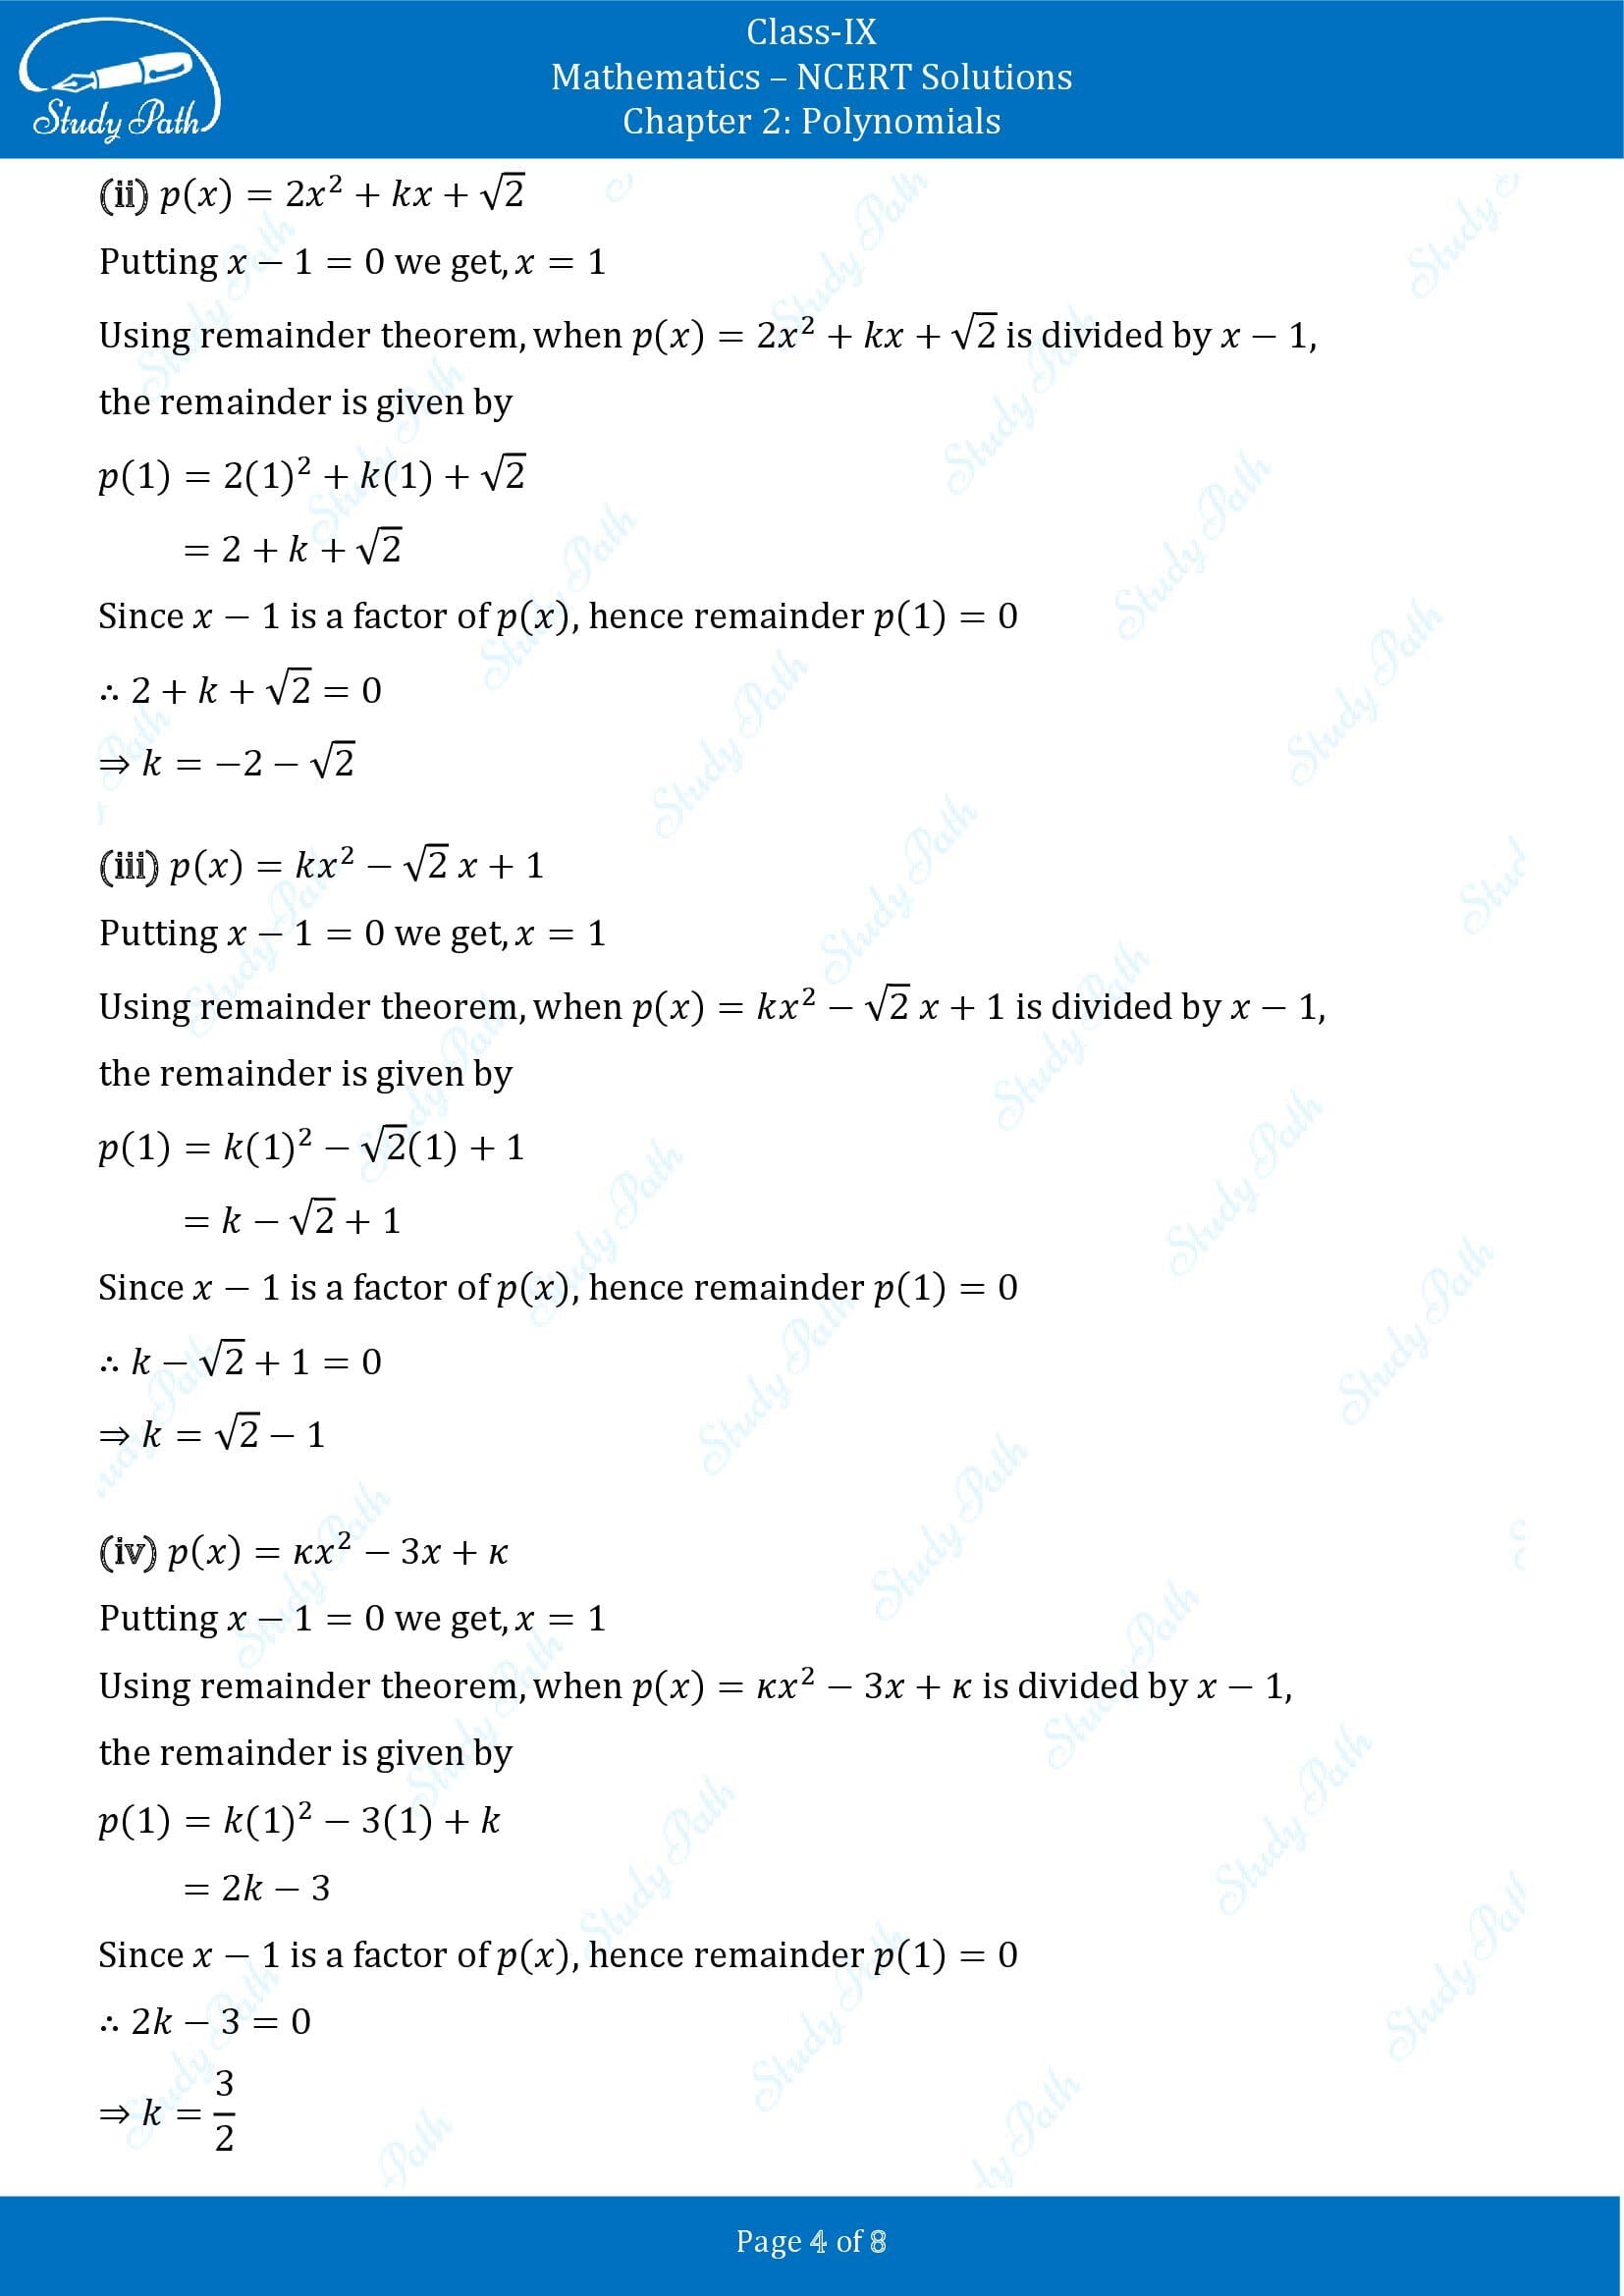 NCERT Solutions for Class 9 Maths Chapter 2 Polynomials Exercise 2.4 00004